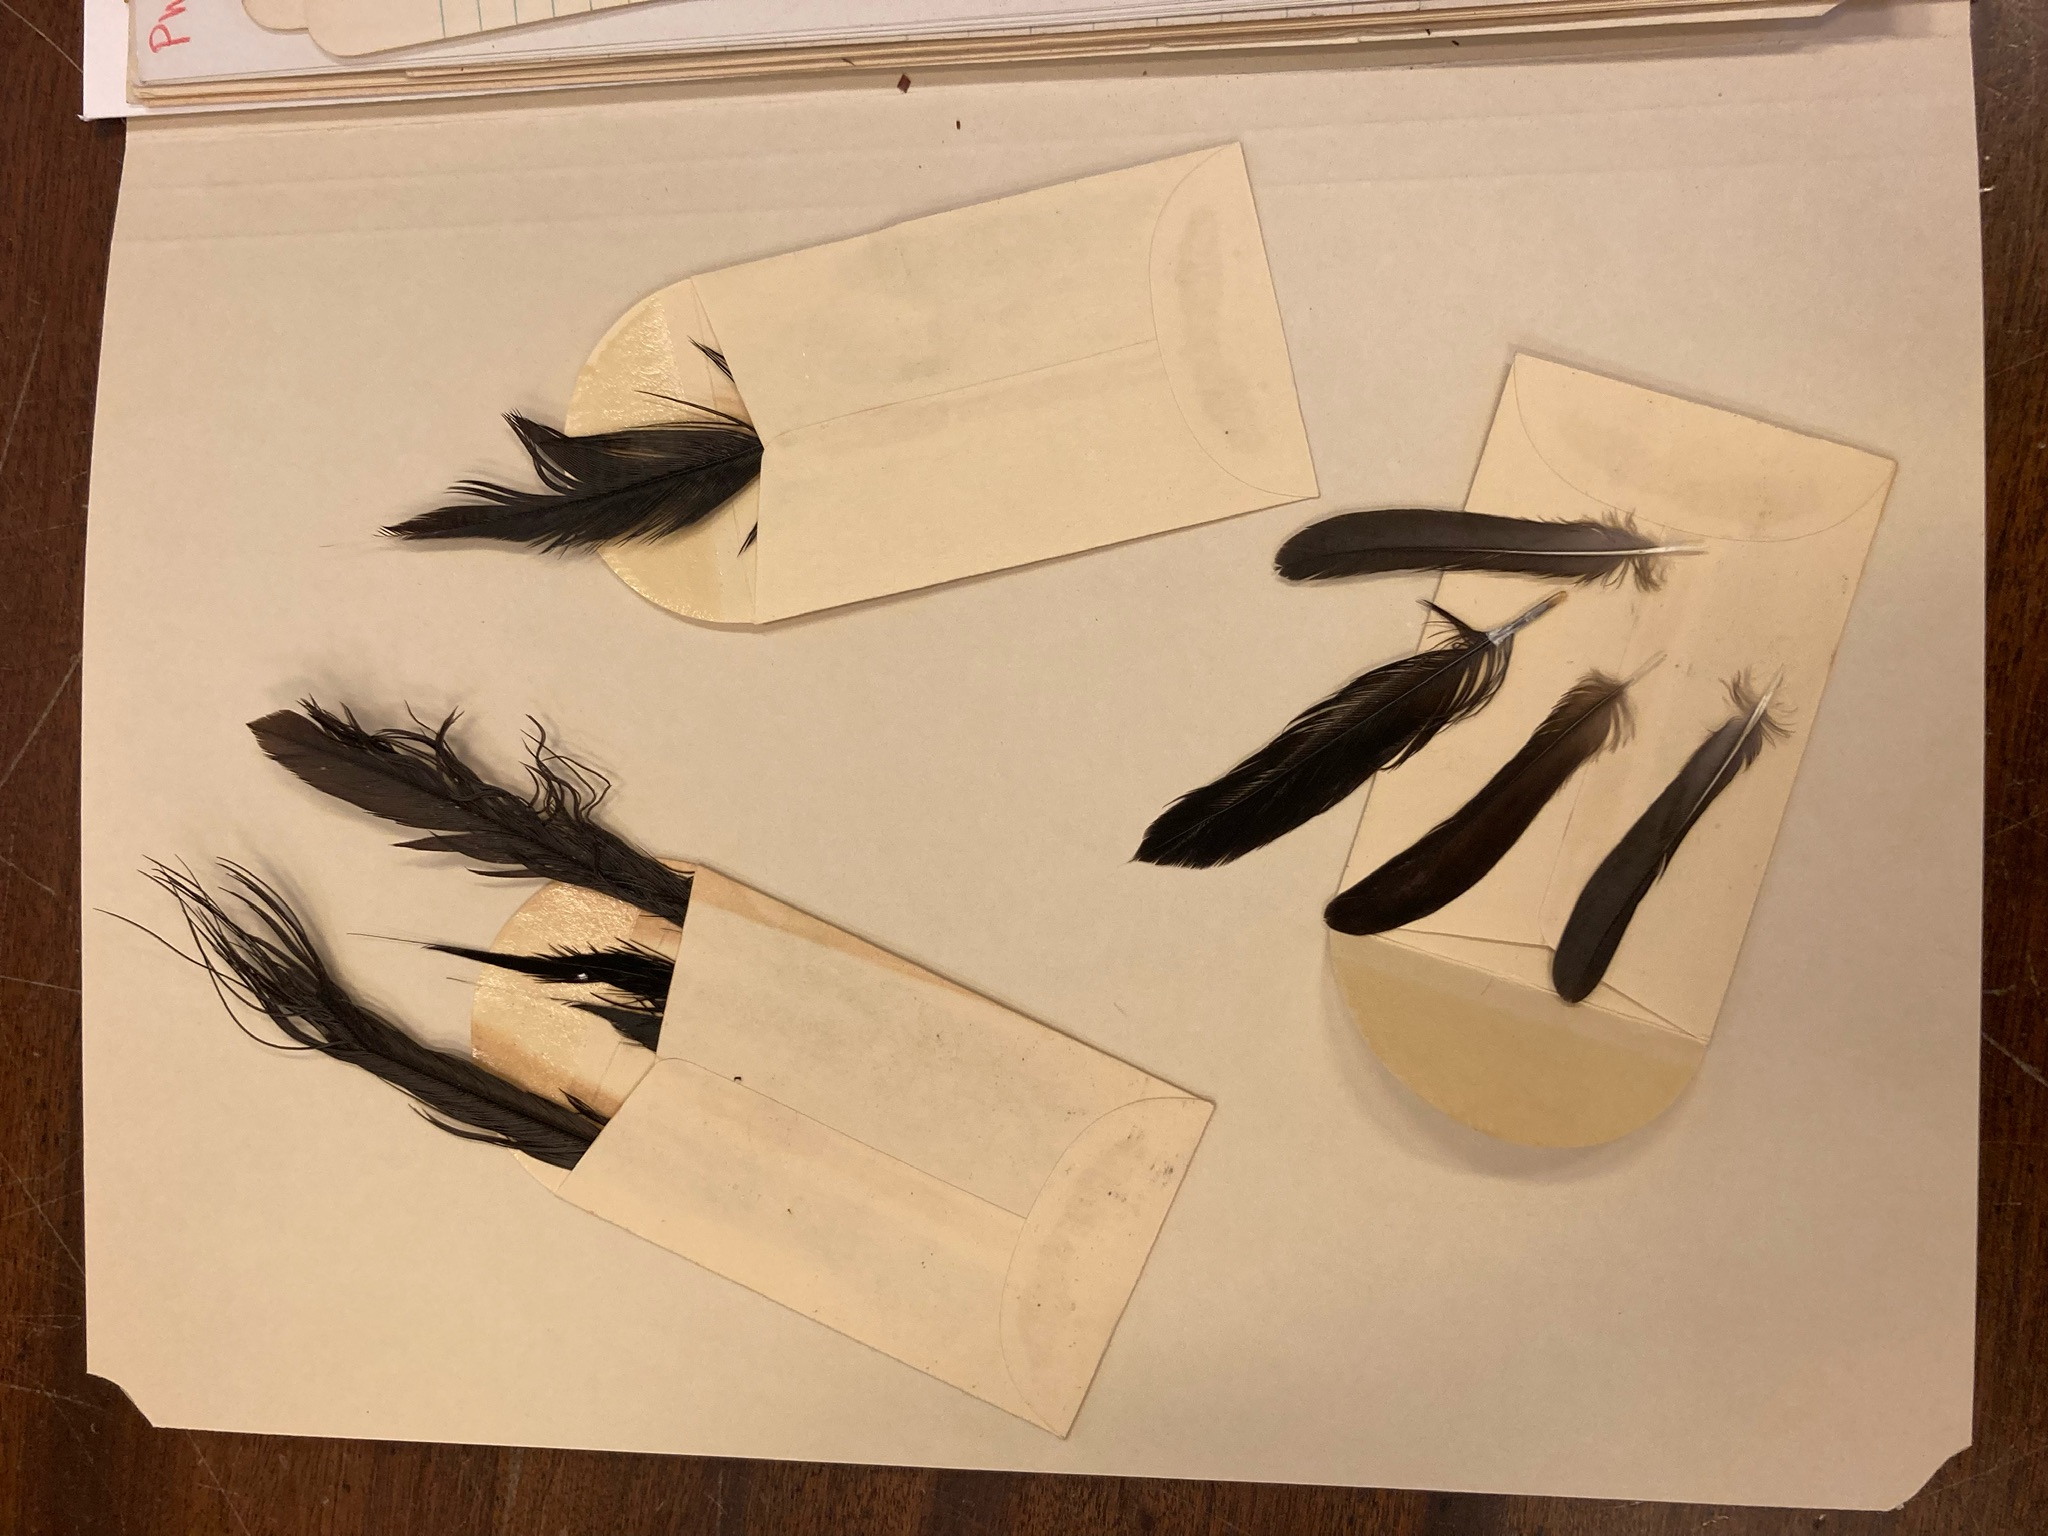 photo of feathers found in Witschi papers